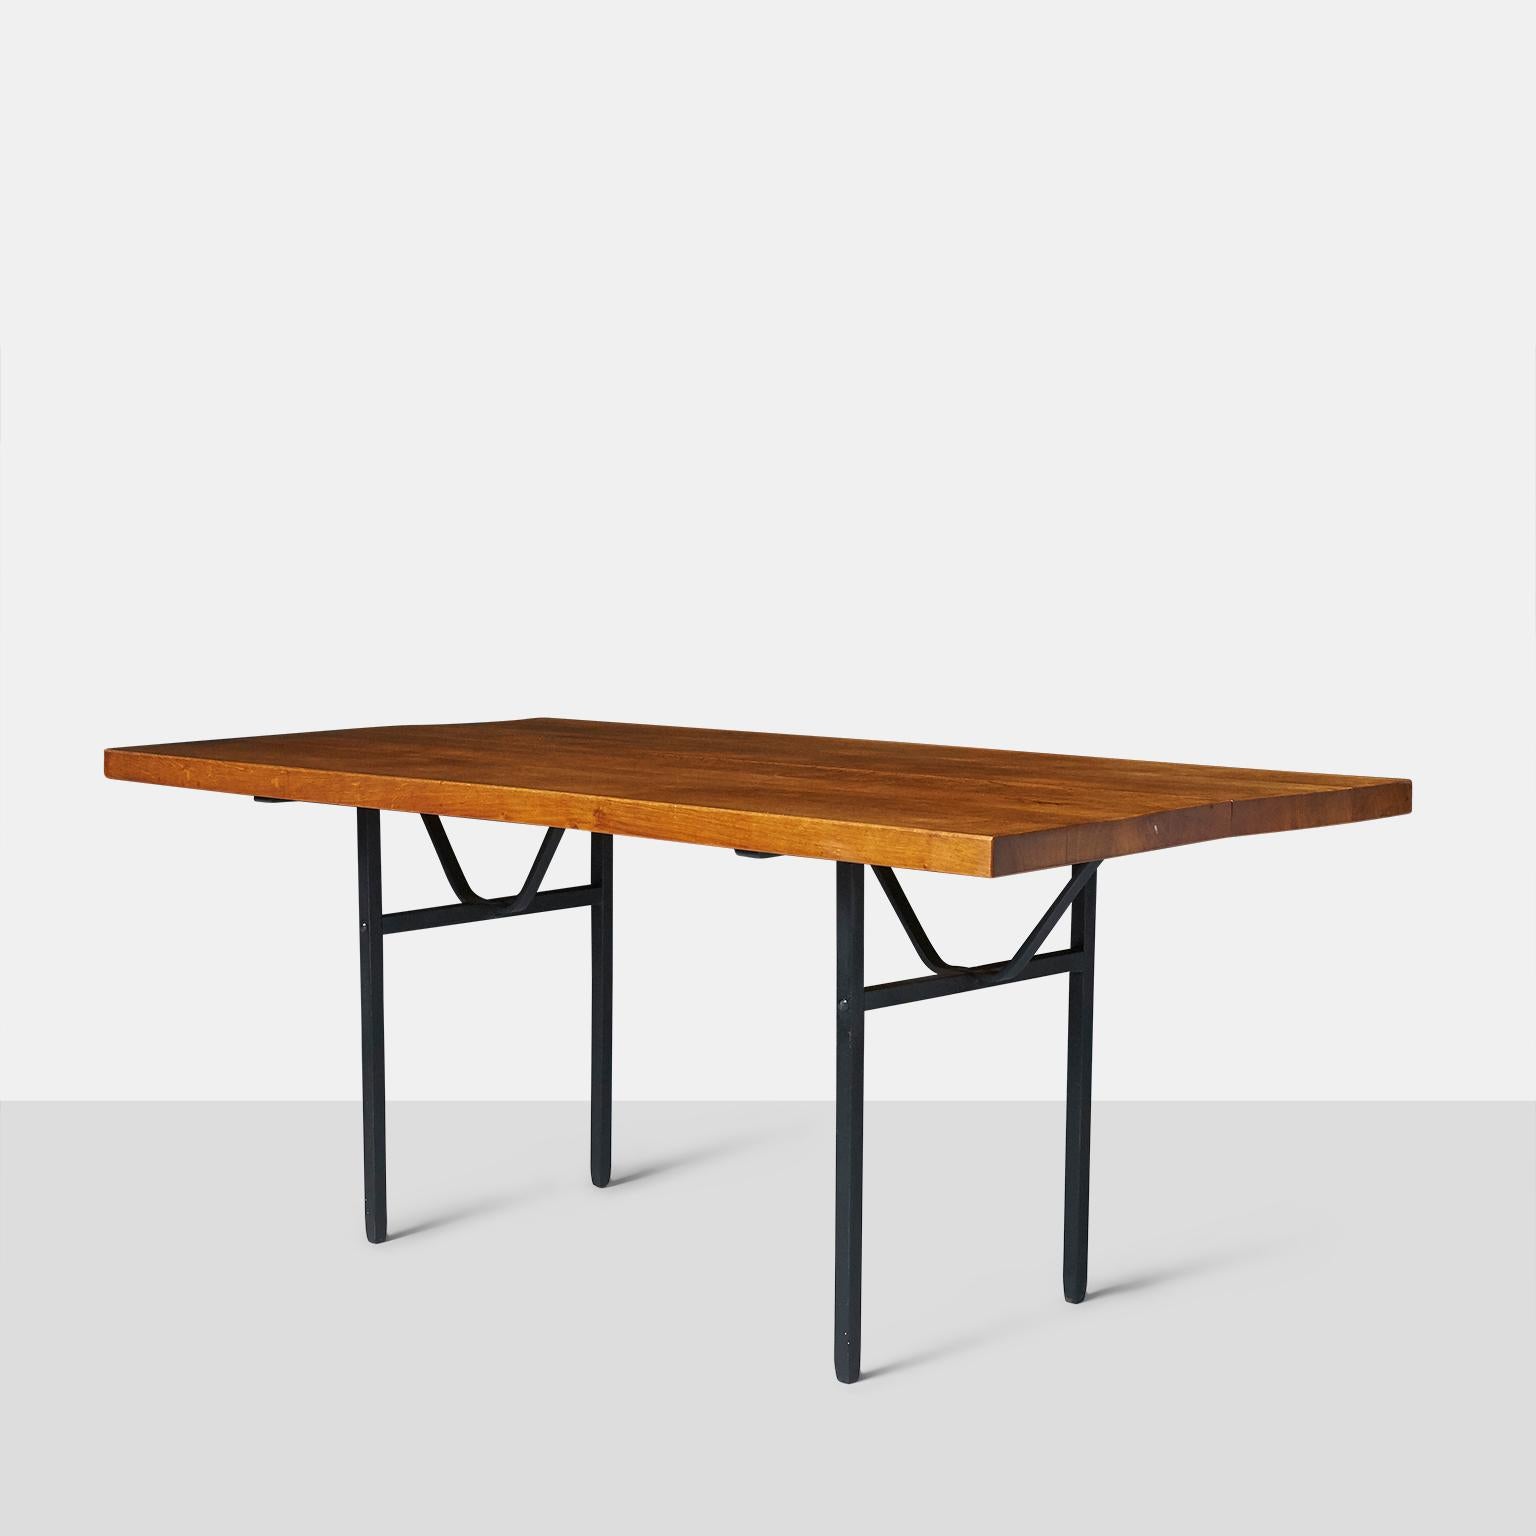 Jean Touret Dining Table
A rectangular dining table by Jean Touret with a 1 3/4